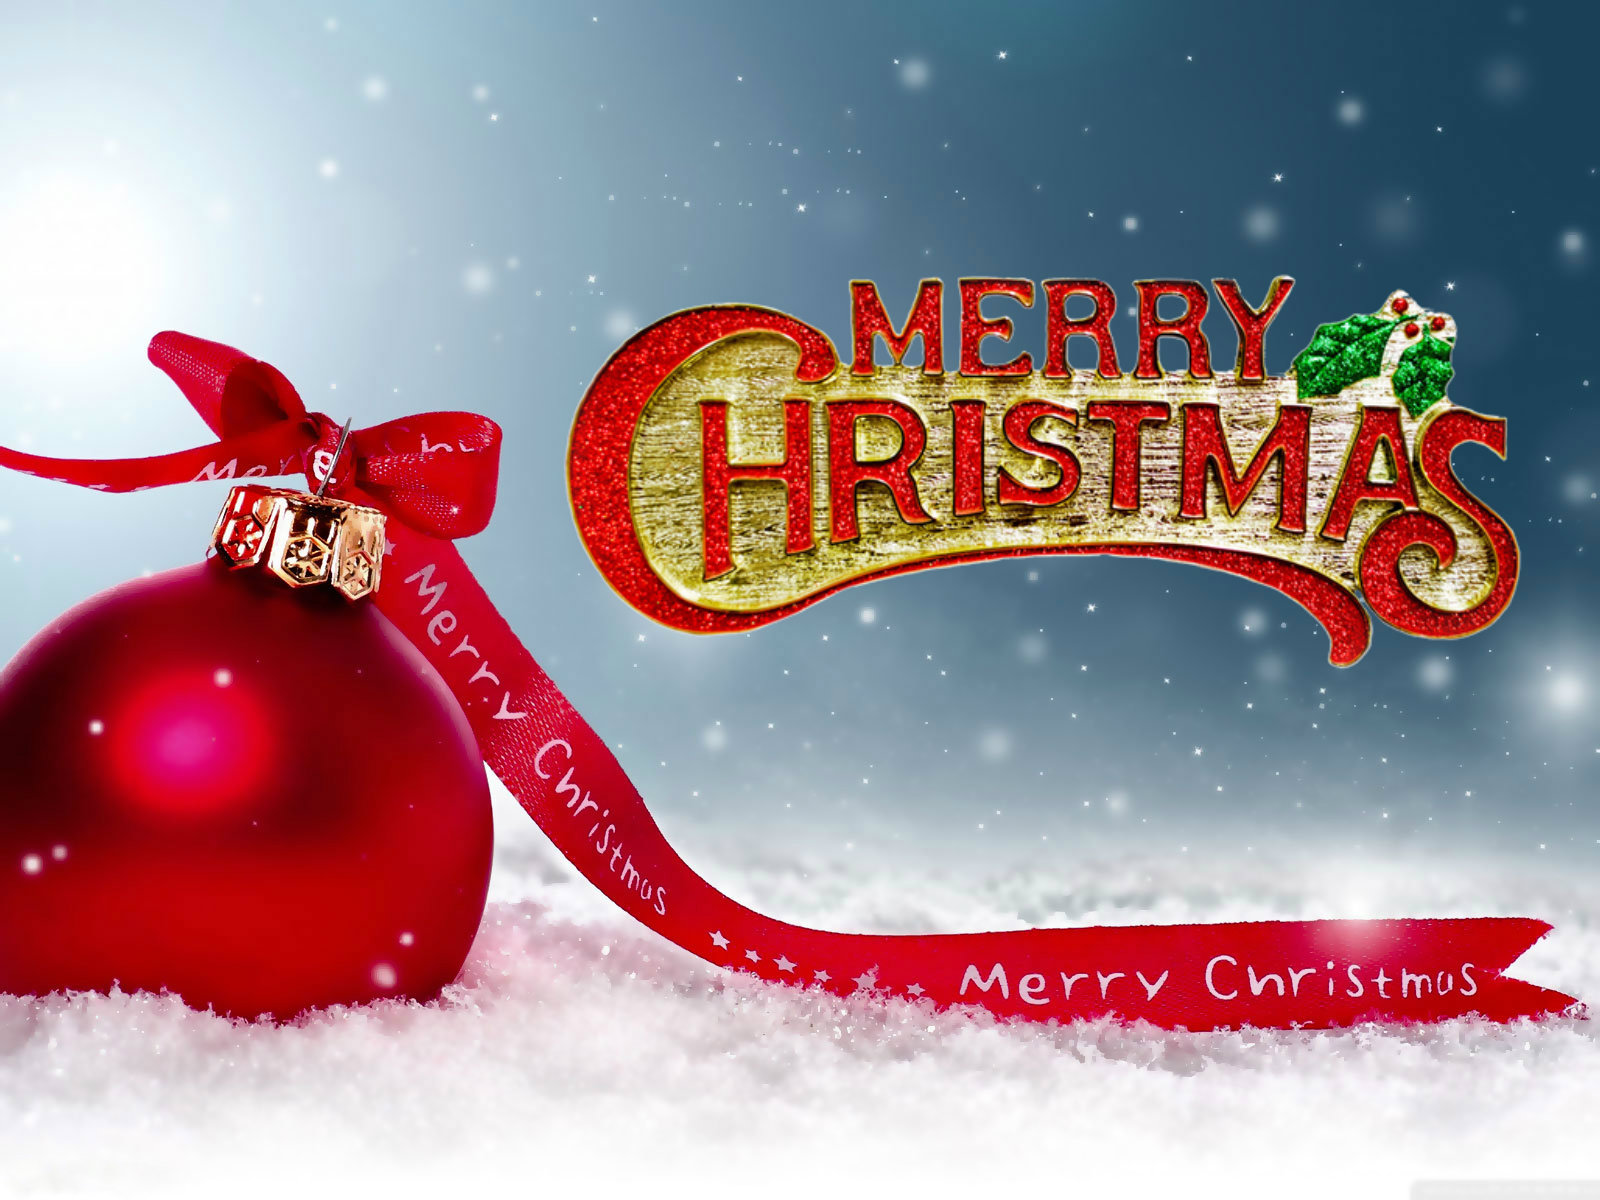 Merry Christmas Wishes Quotes Image Wallpaper For